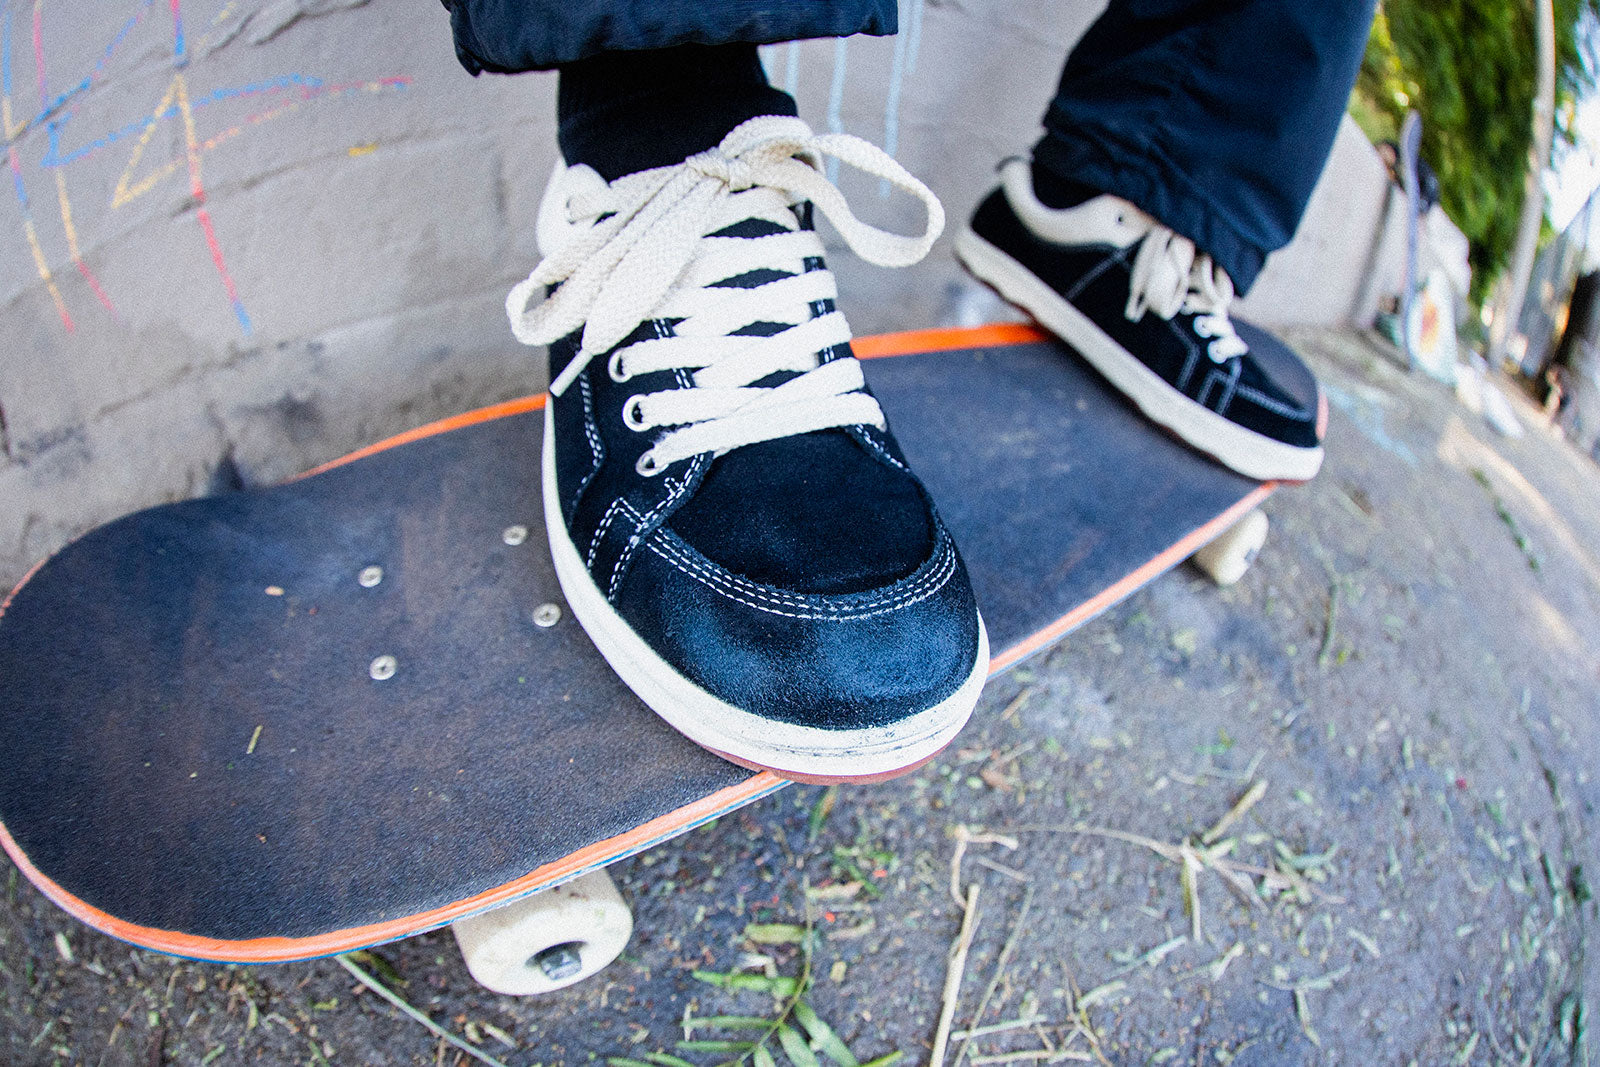 Simple skate shoes